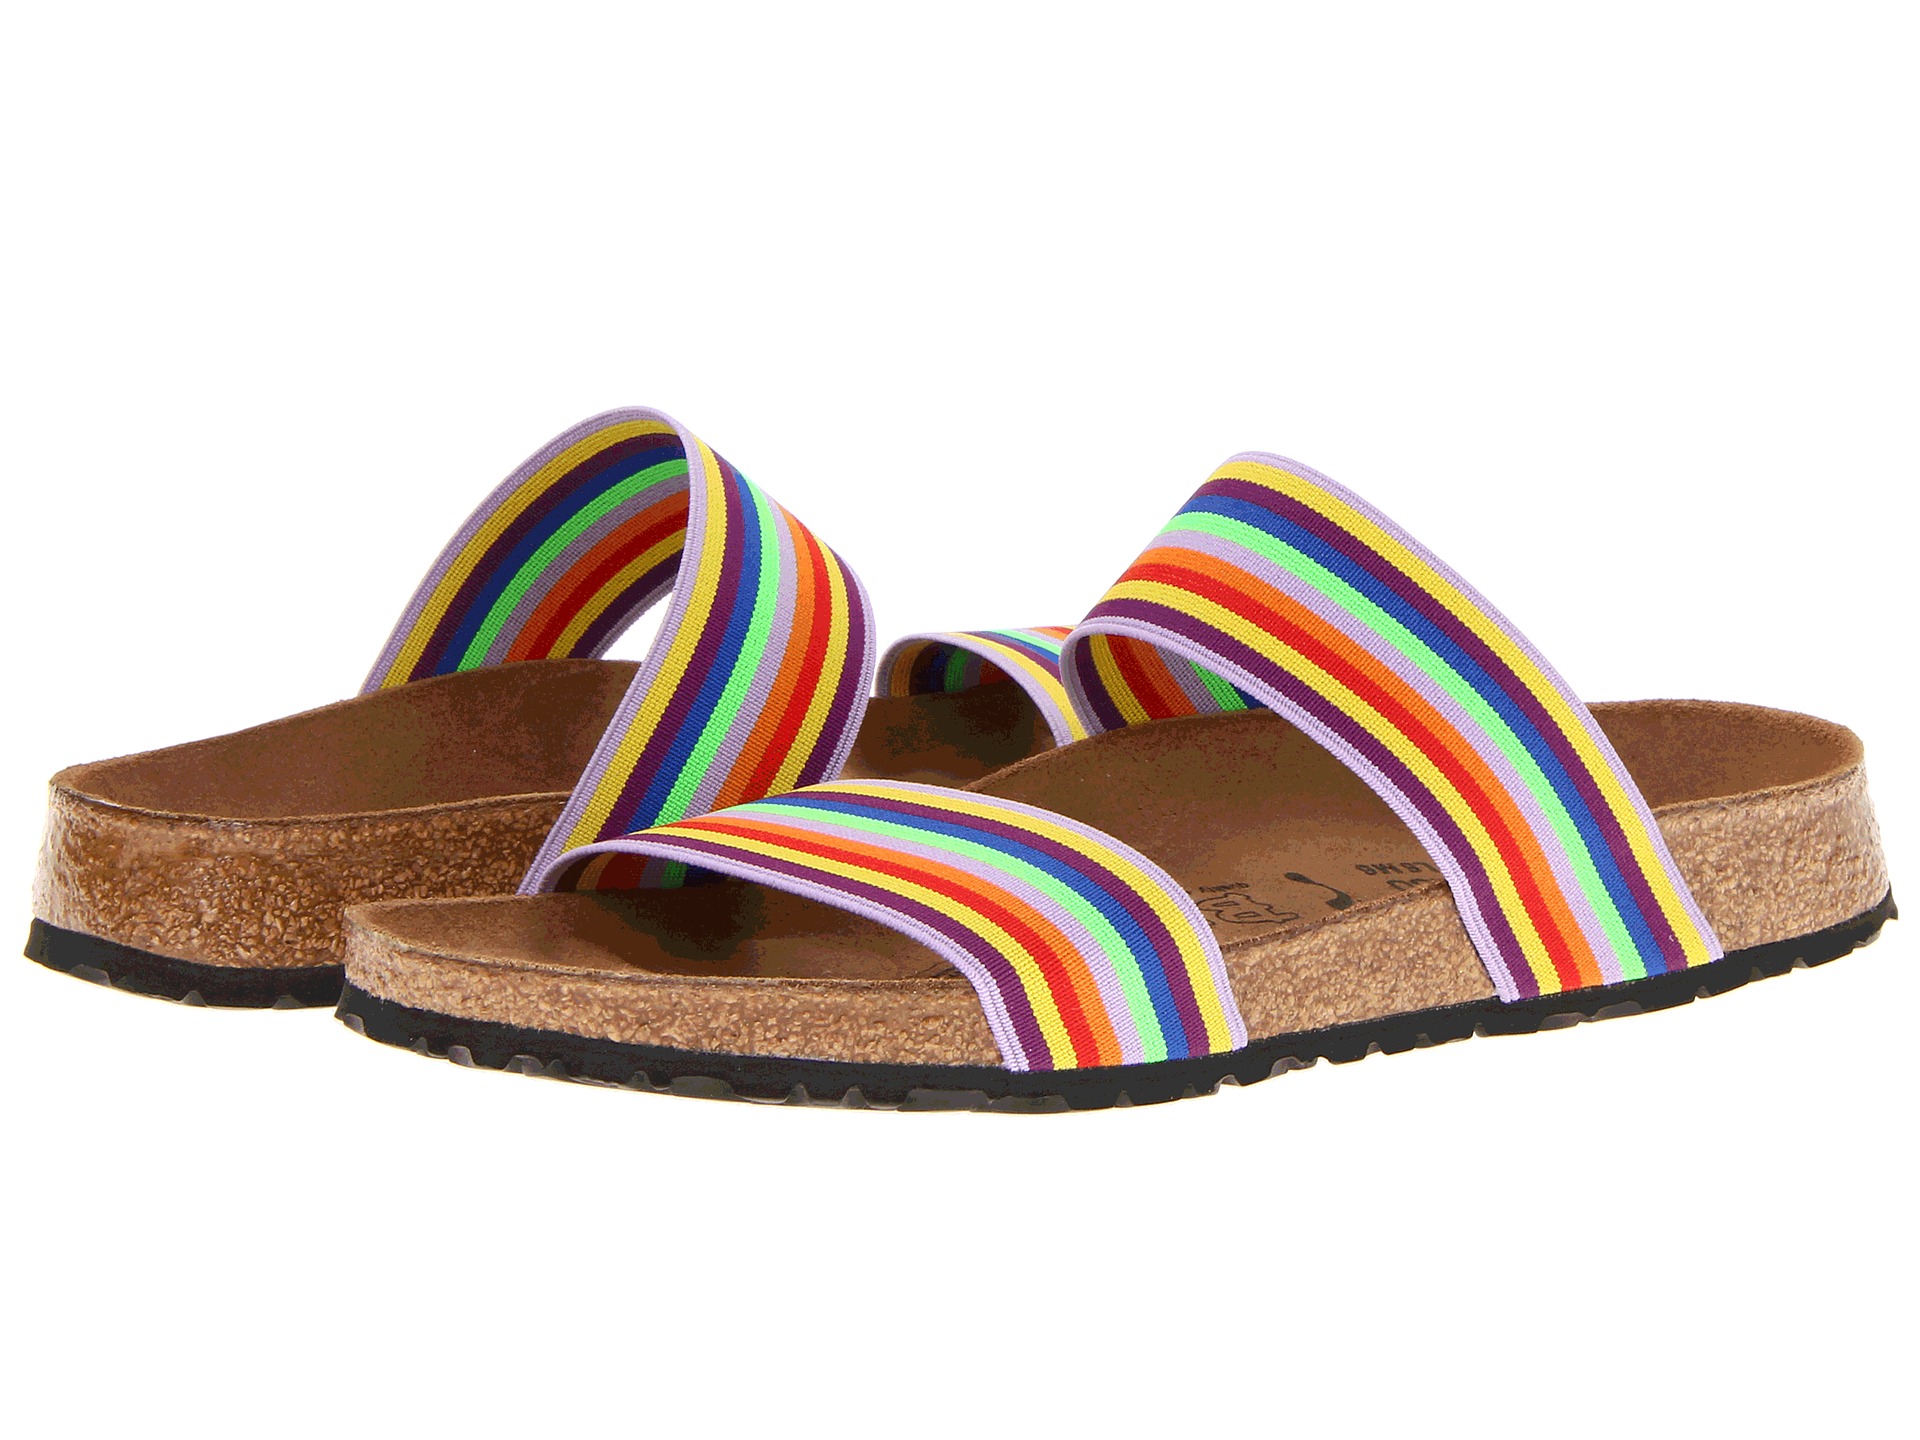 ... Birki Curacao By Birkenstock, Shoes | Shipped Free at Zappos